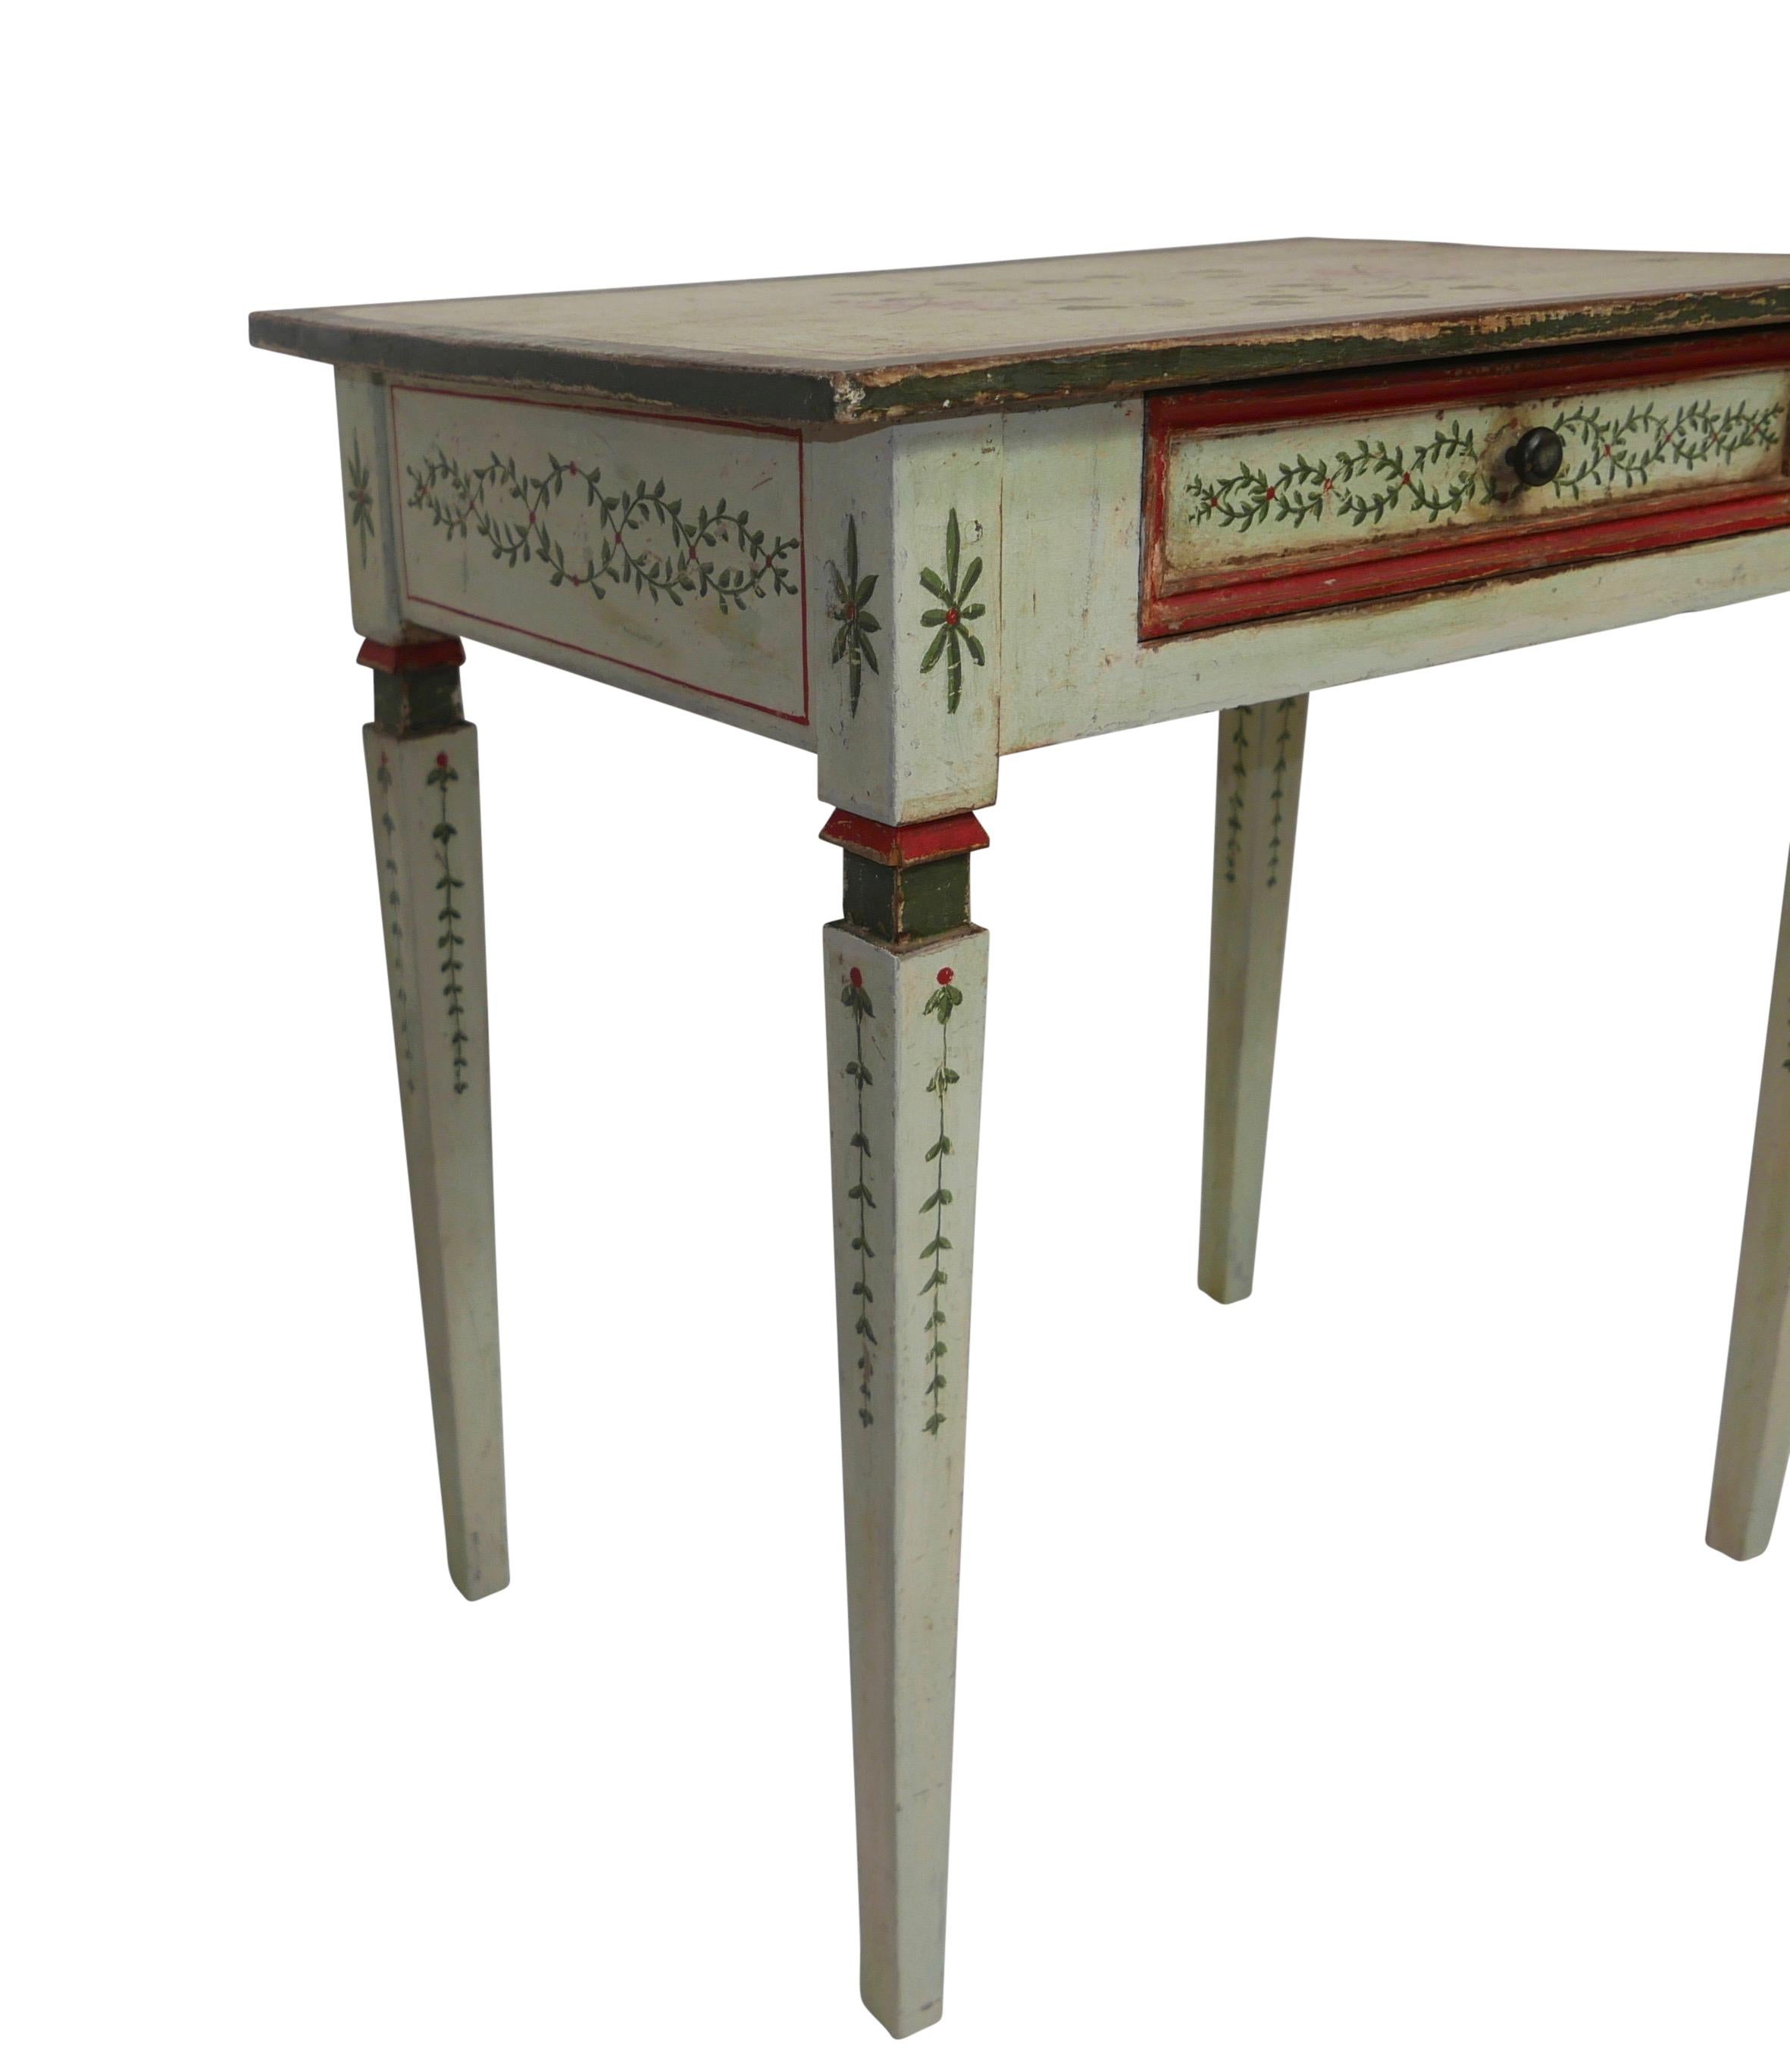 Hand-Painted Italian Painted Writing Table, Desk, Side Table, Early 19th Century